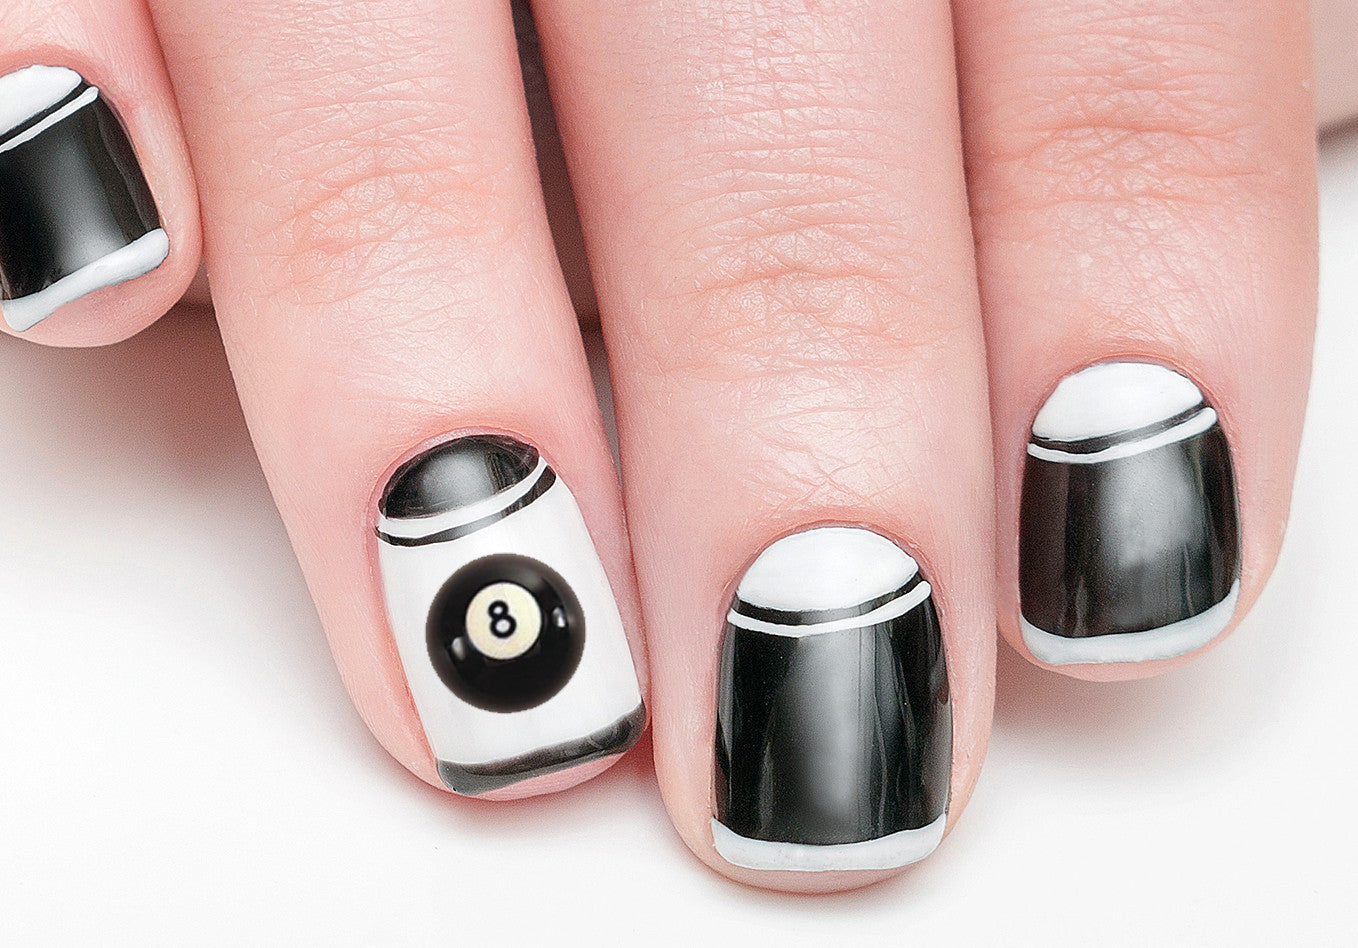 Eight Ball Nail Art Stickers - wide 9